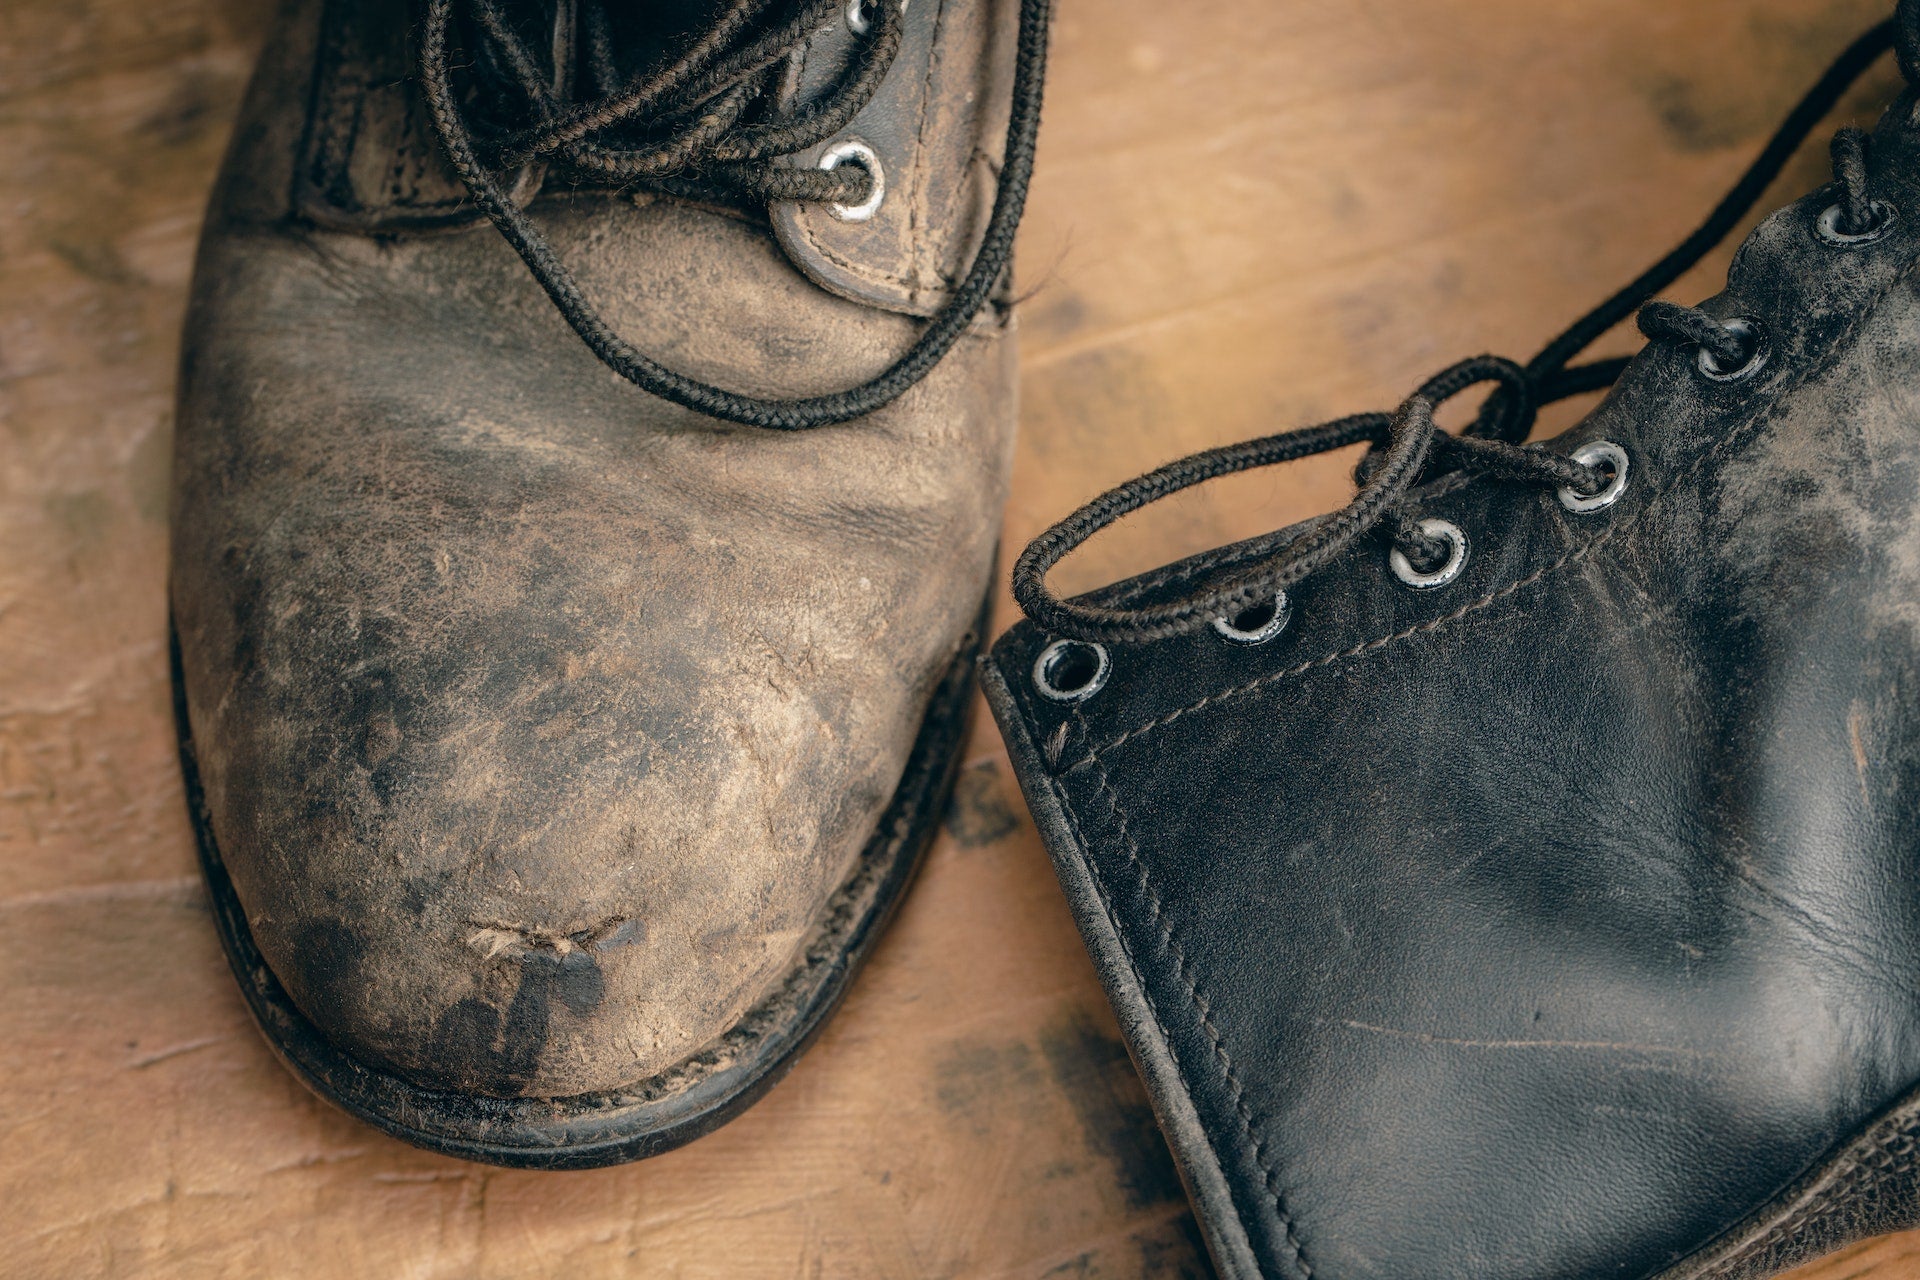 How to Clean Leather Boots the Right Way